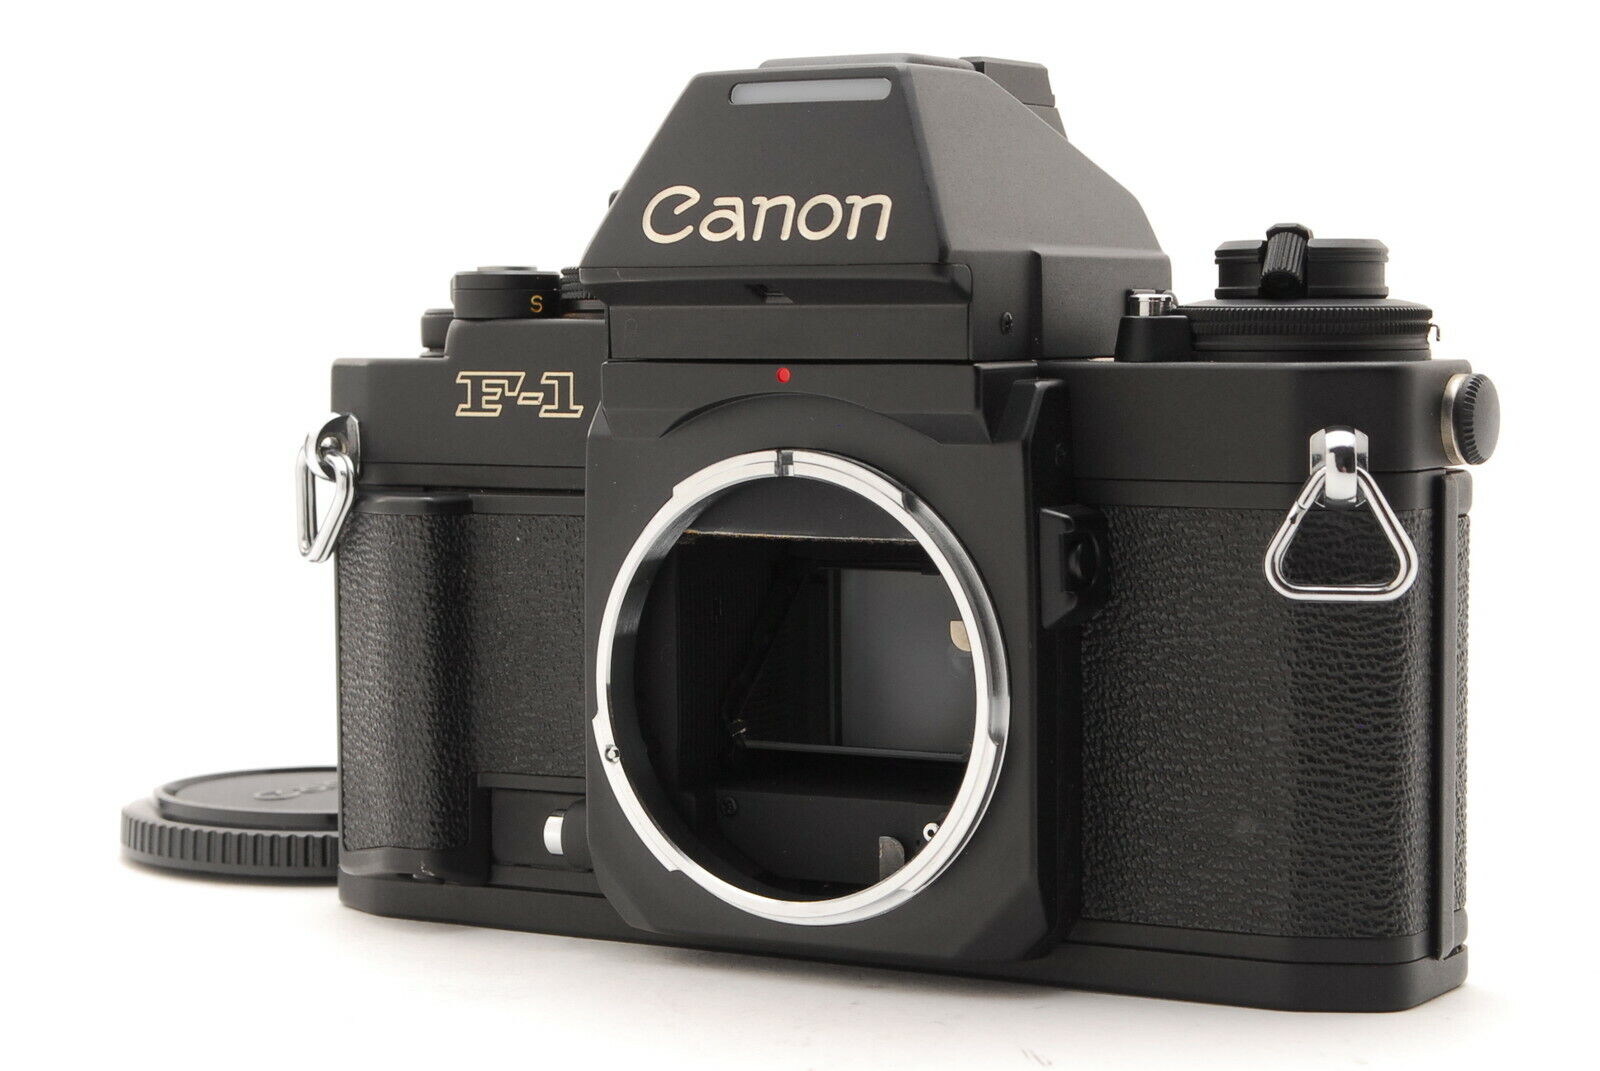 【Top Mint】Canon New F-1 AE Finder 35mm SLR Film Camera Body from